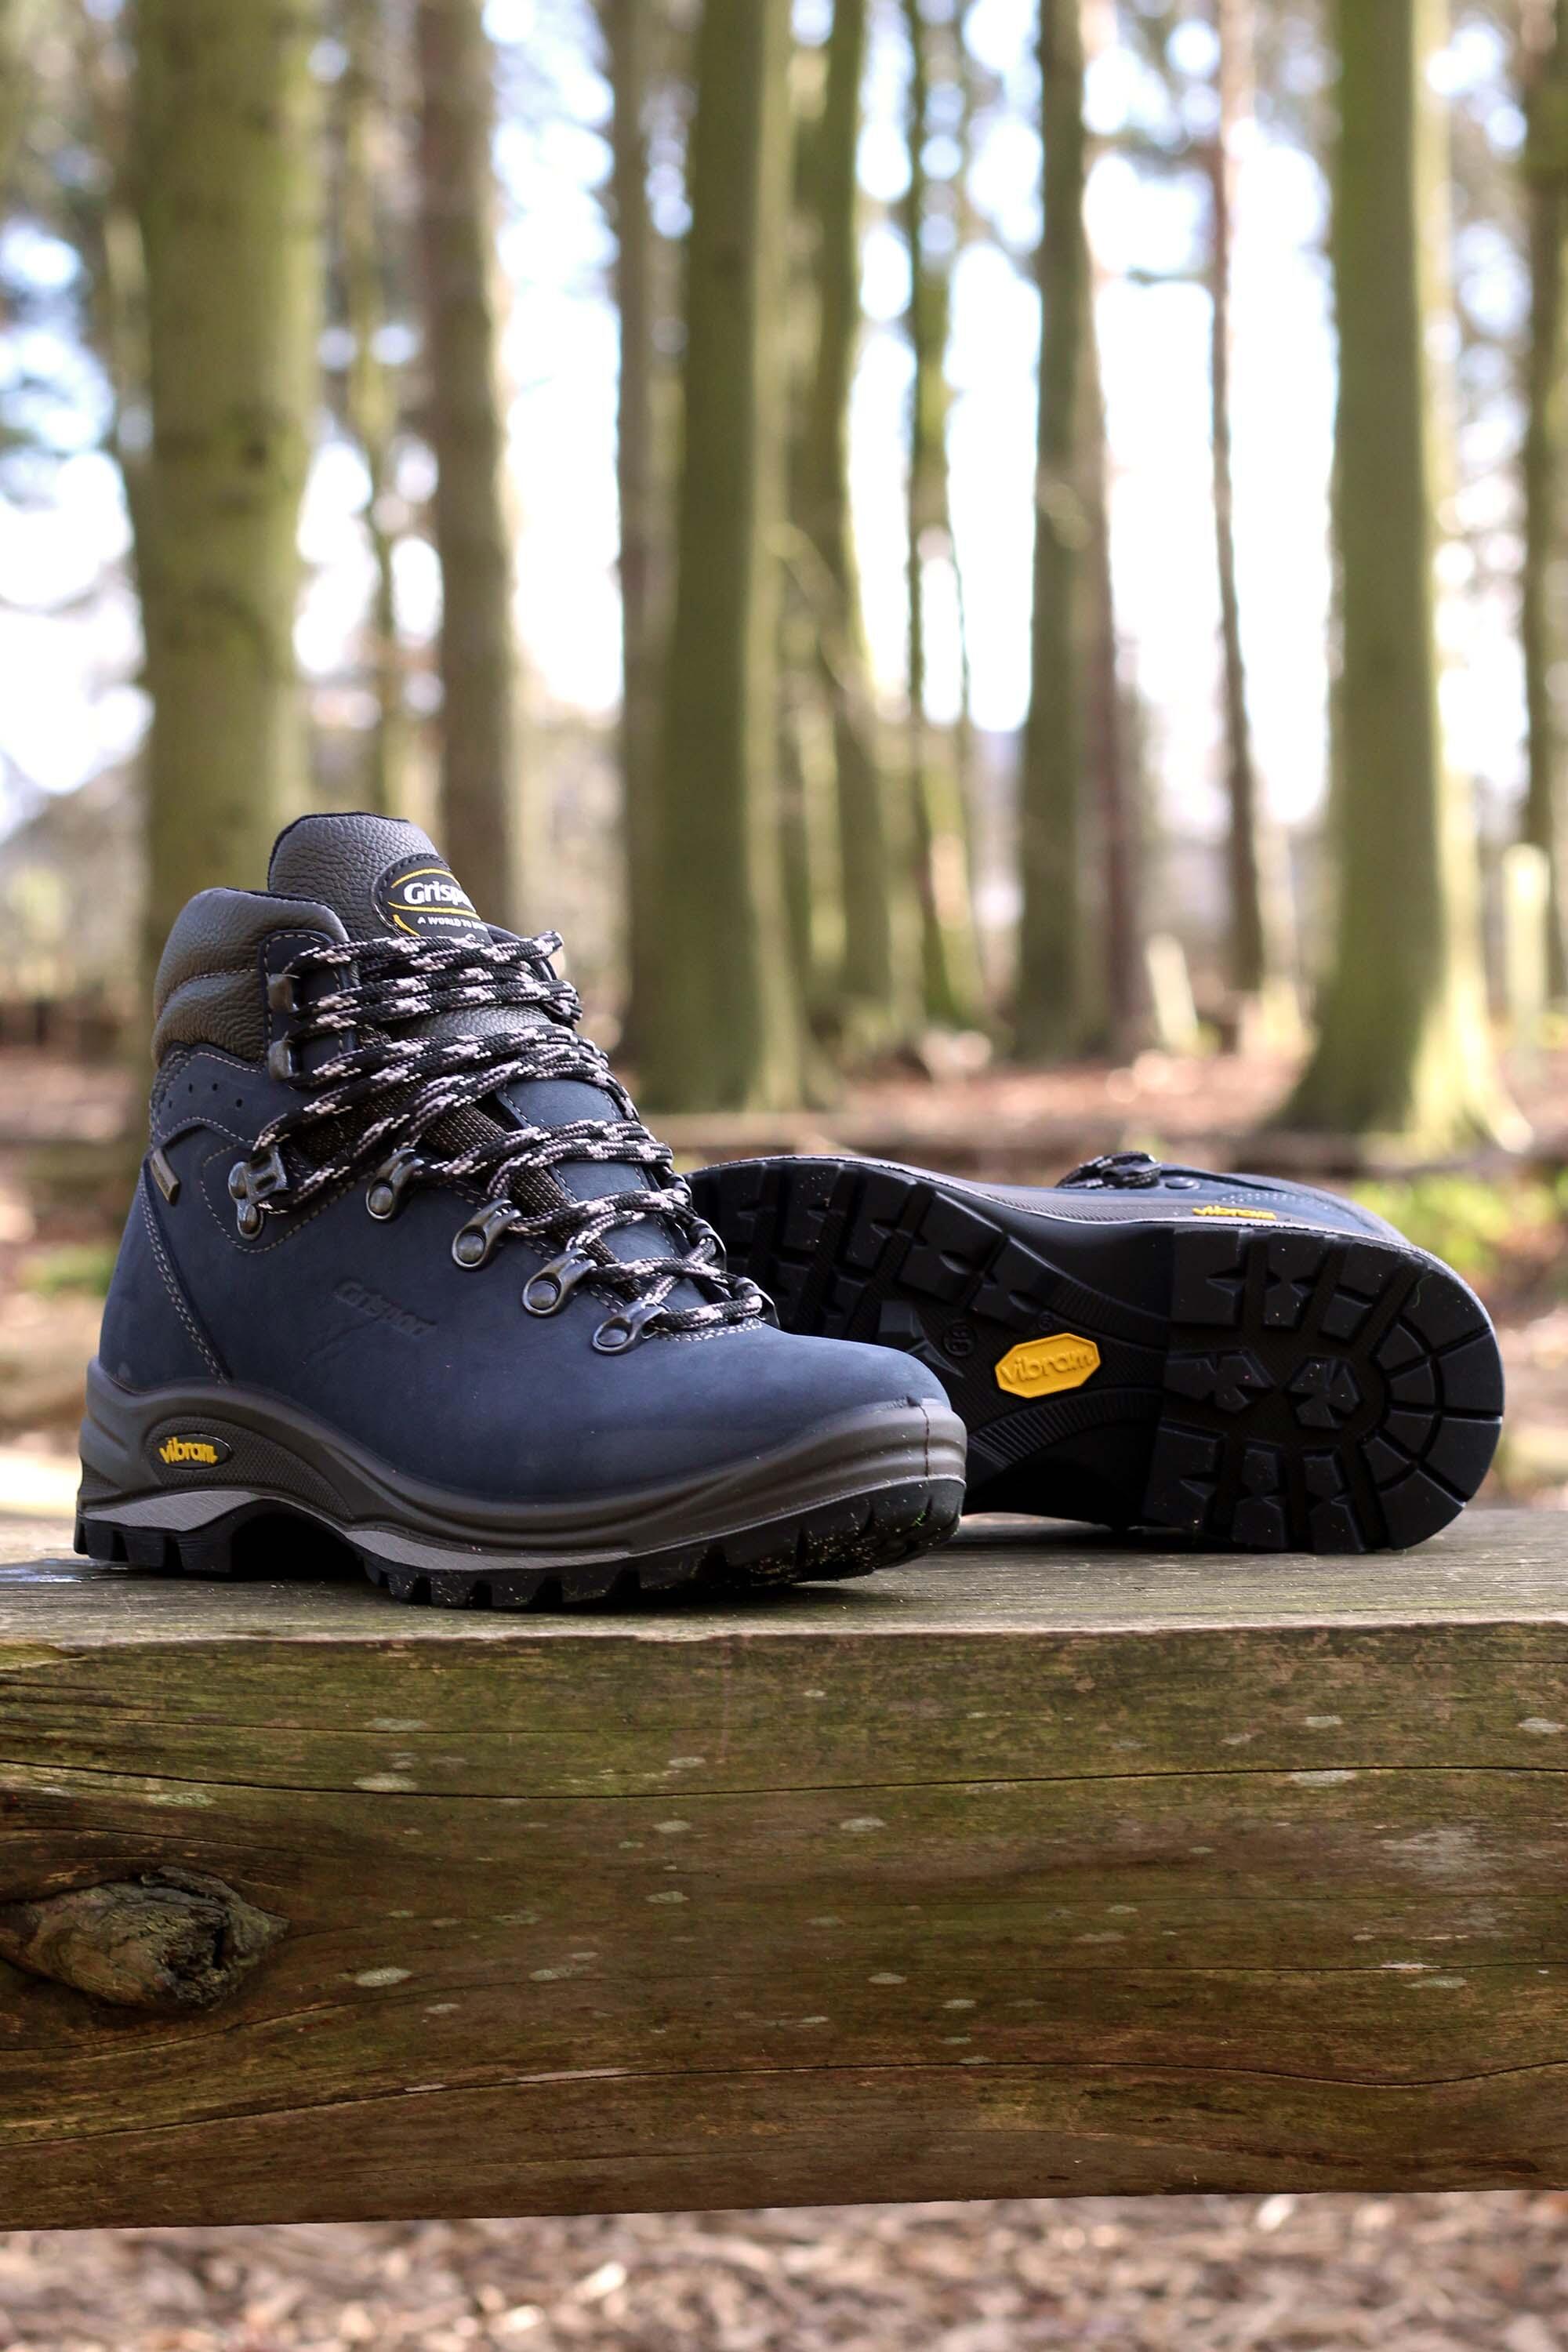 Lady Tempest Blue Waterproof Hiking Boot 5/5